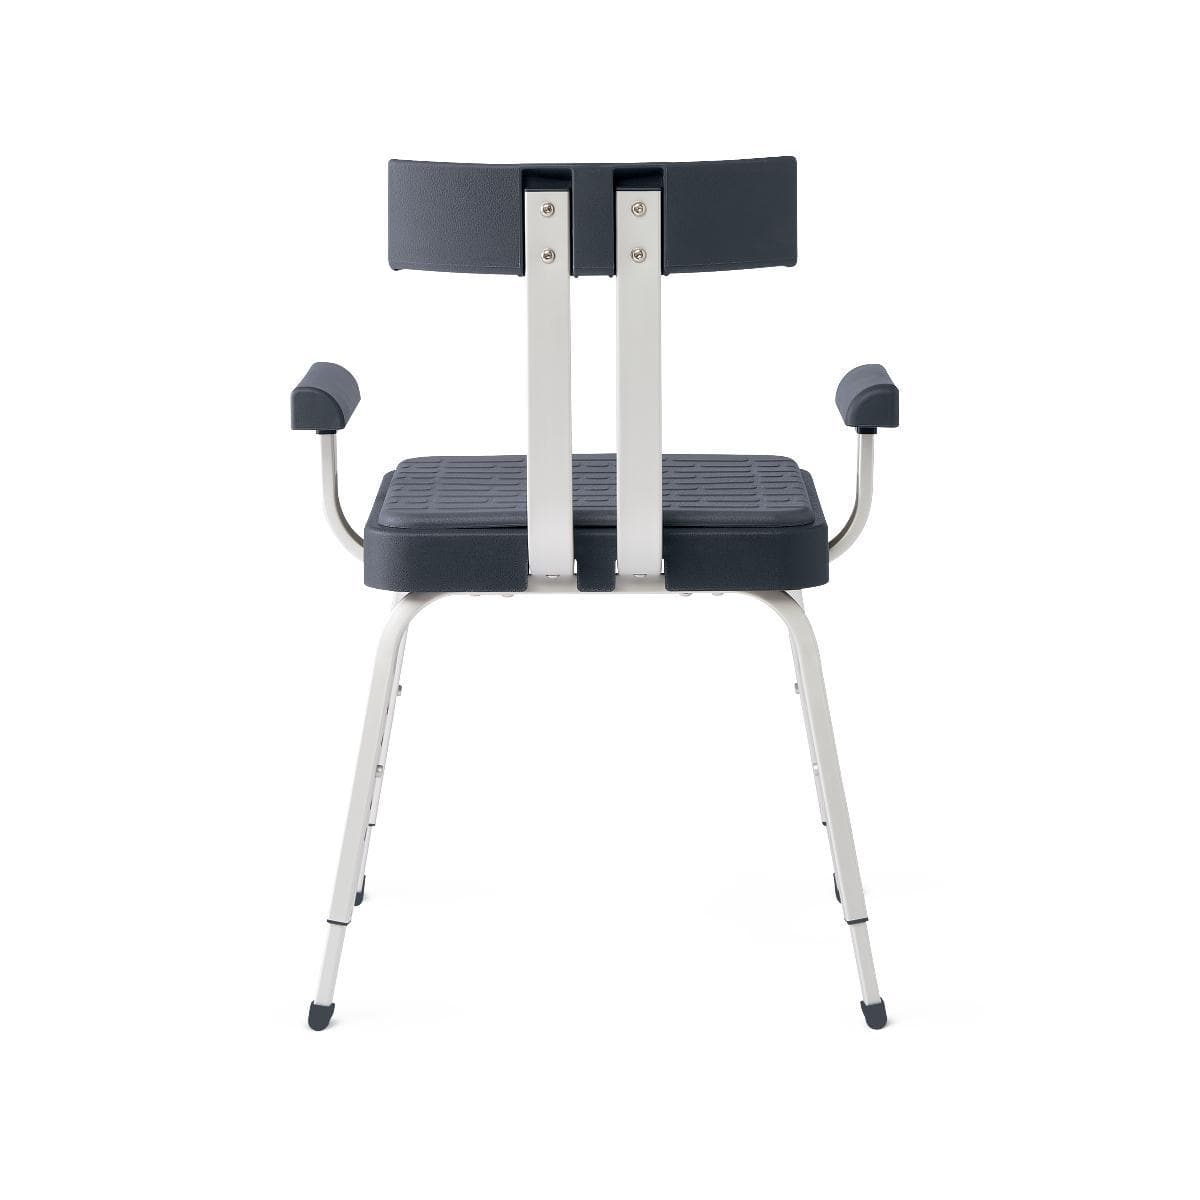 Medline Momentum Shower Chair with Arms & Microban Antimicrobial Protection - Senior.com Shower Chairs